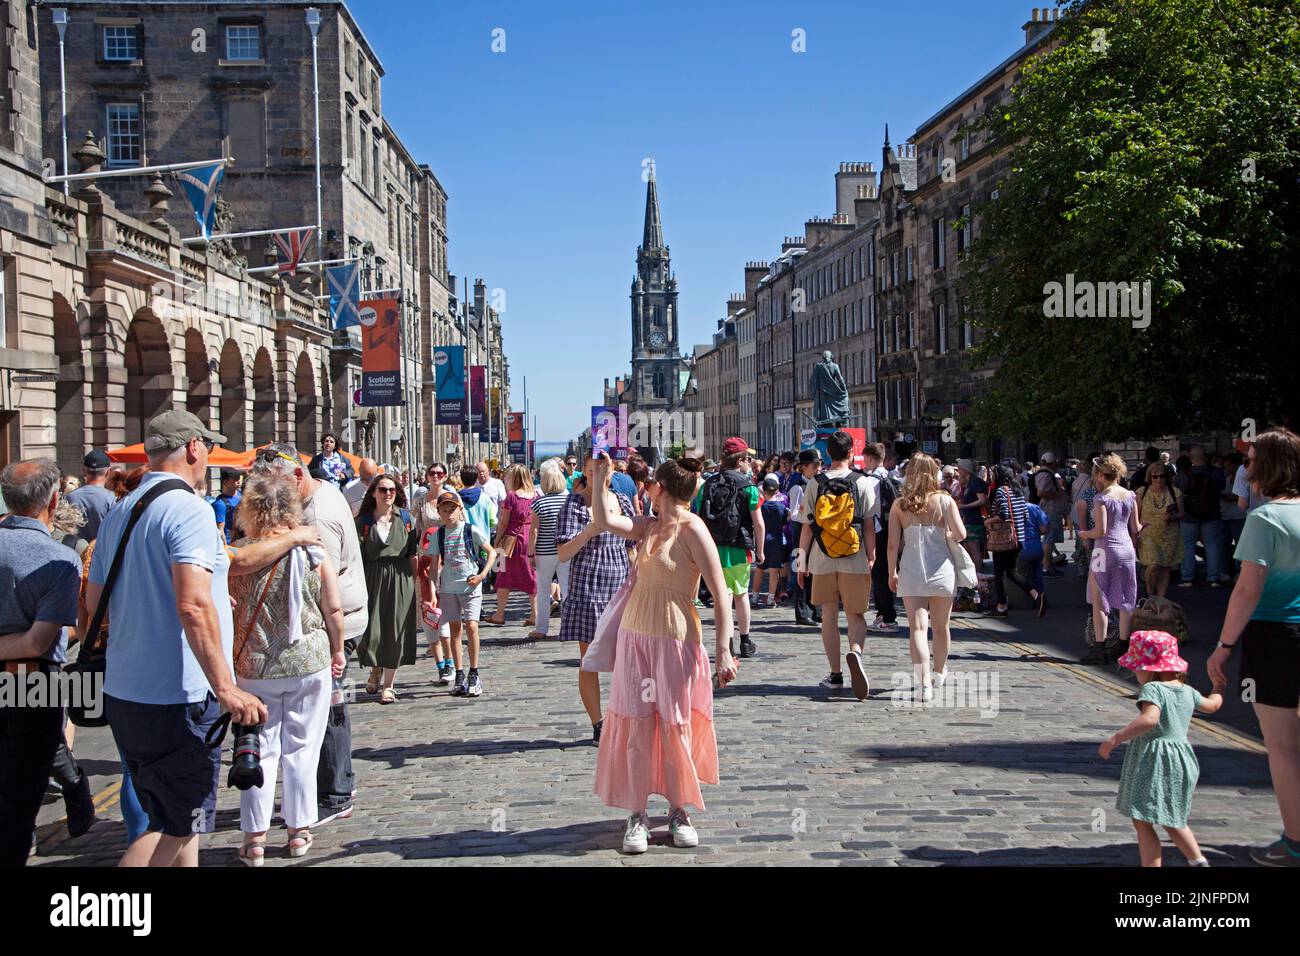 City Centre, Edinburgh, Scotland, UK. 11th August 2022. EdFringe 6th Day on the Royal Mile keeping busy with crowds of people looking for entertainment. Weather 27 degrees centigrade had people looking to top up water bottles and to find shade in the ciy's gardens. Credit: Arch White/alamy live news. Stock Photo